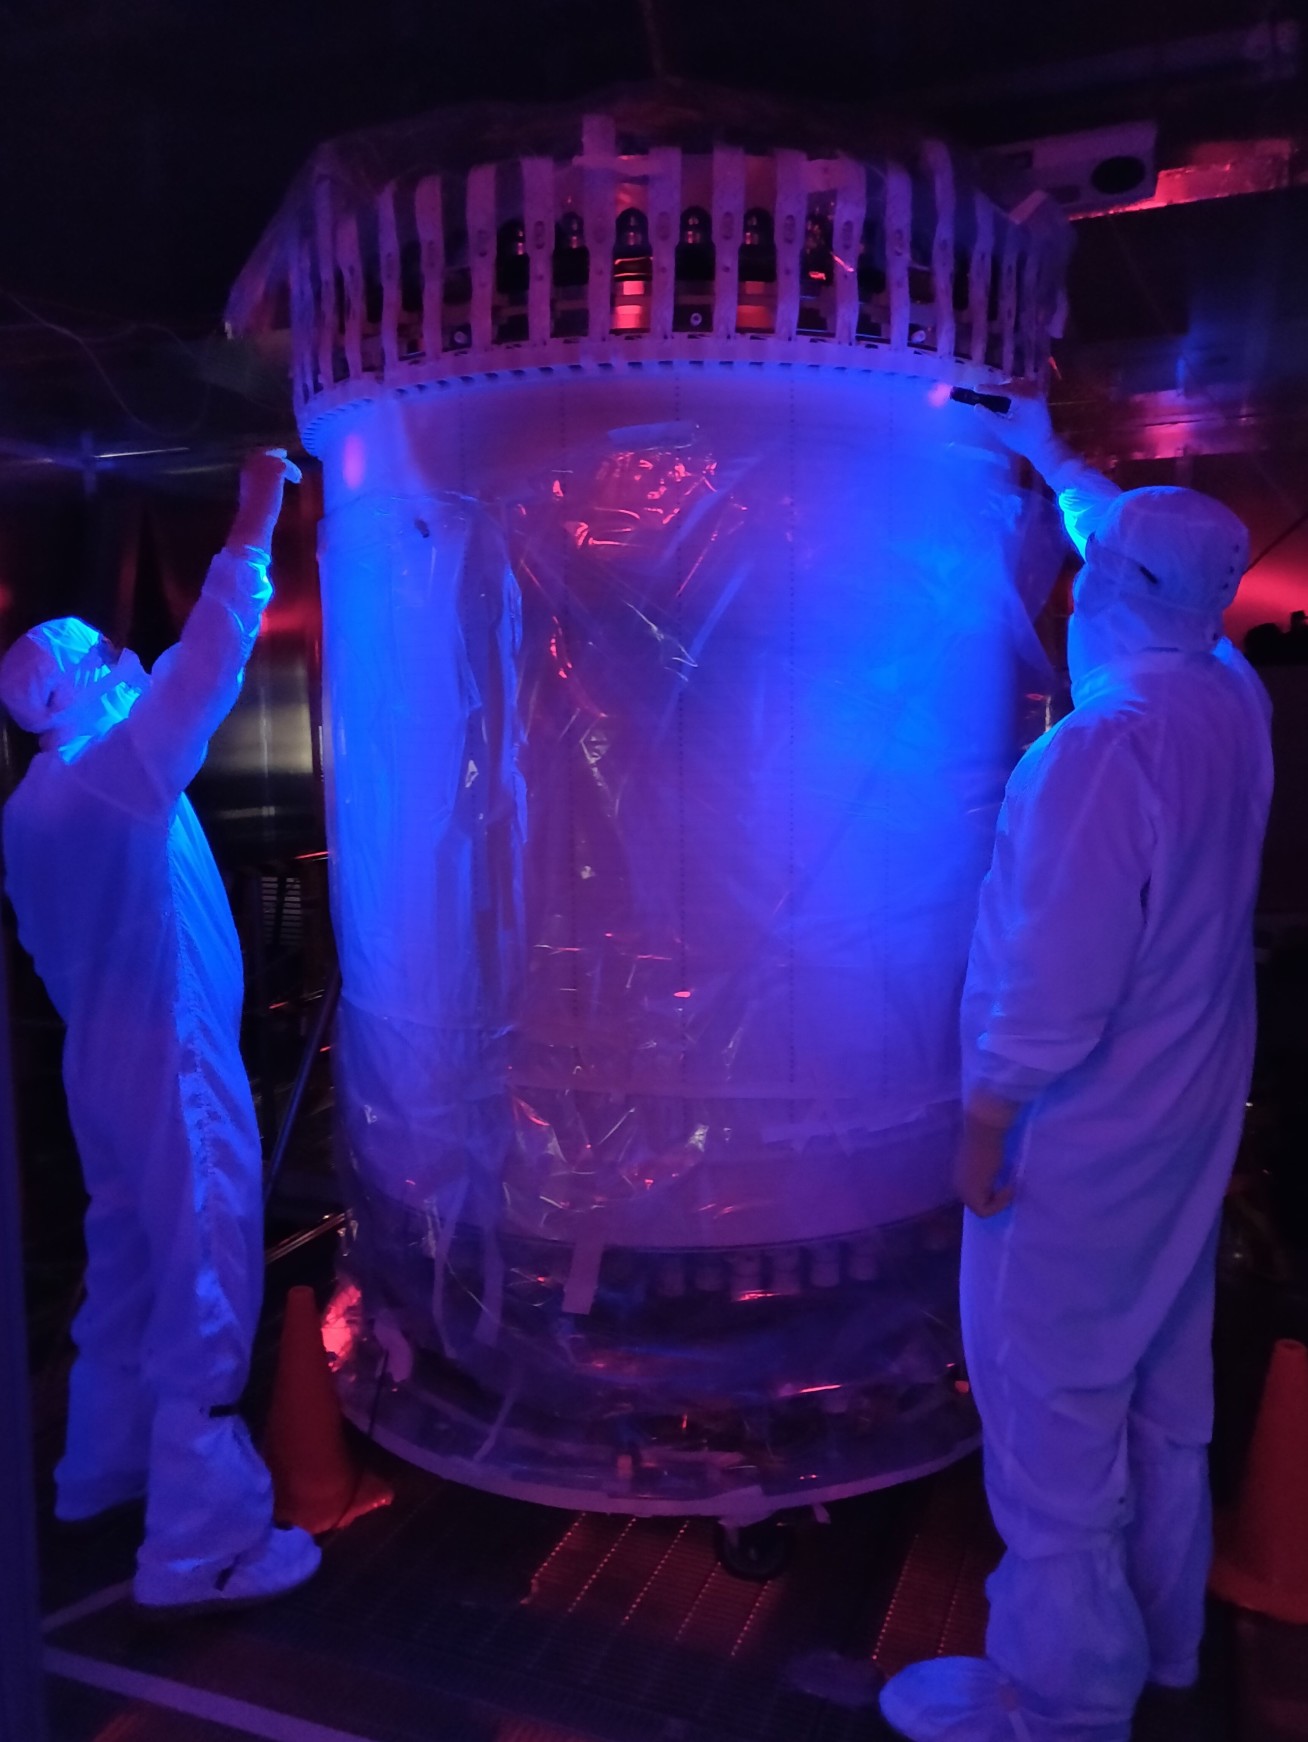 Two people in hazmat suits inspect a large cylinder with UV lights